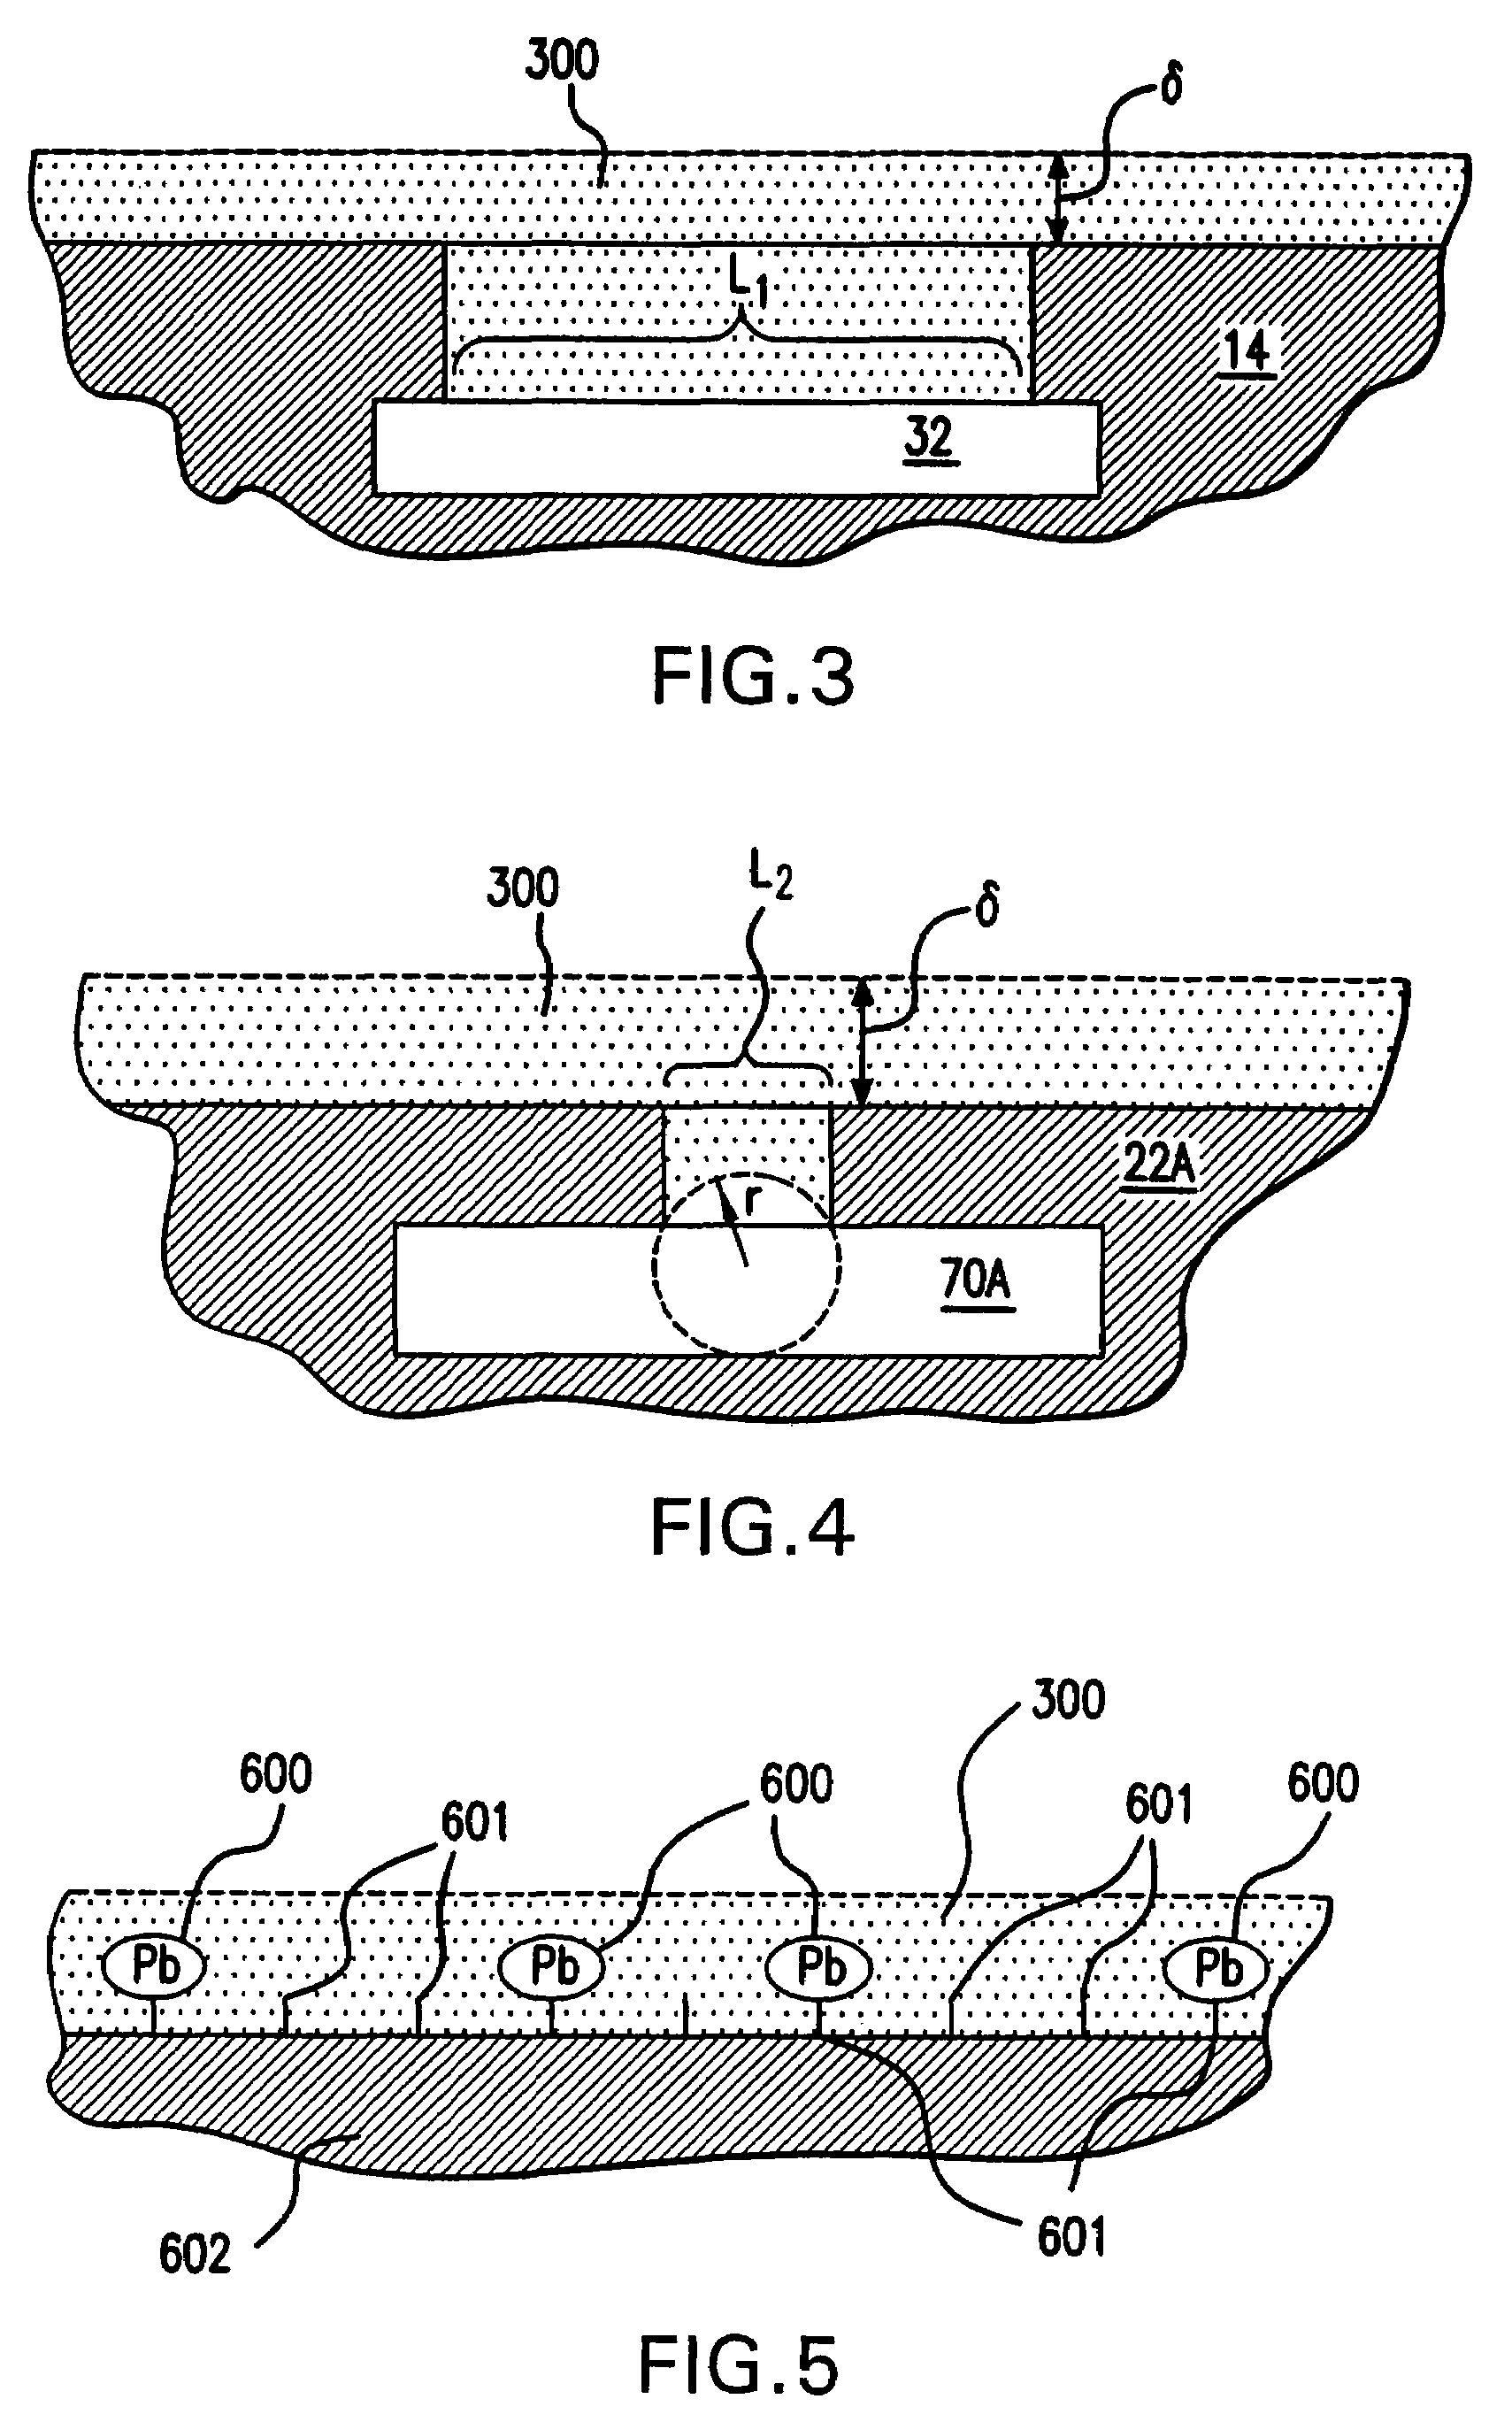 Stable electroless fine pitch interconnect plating